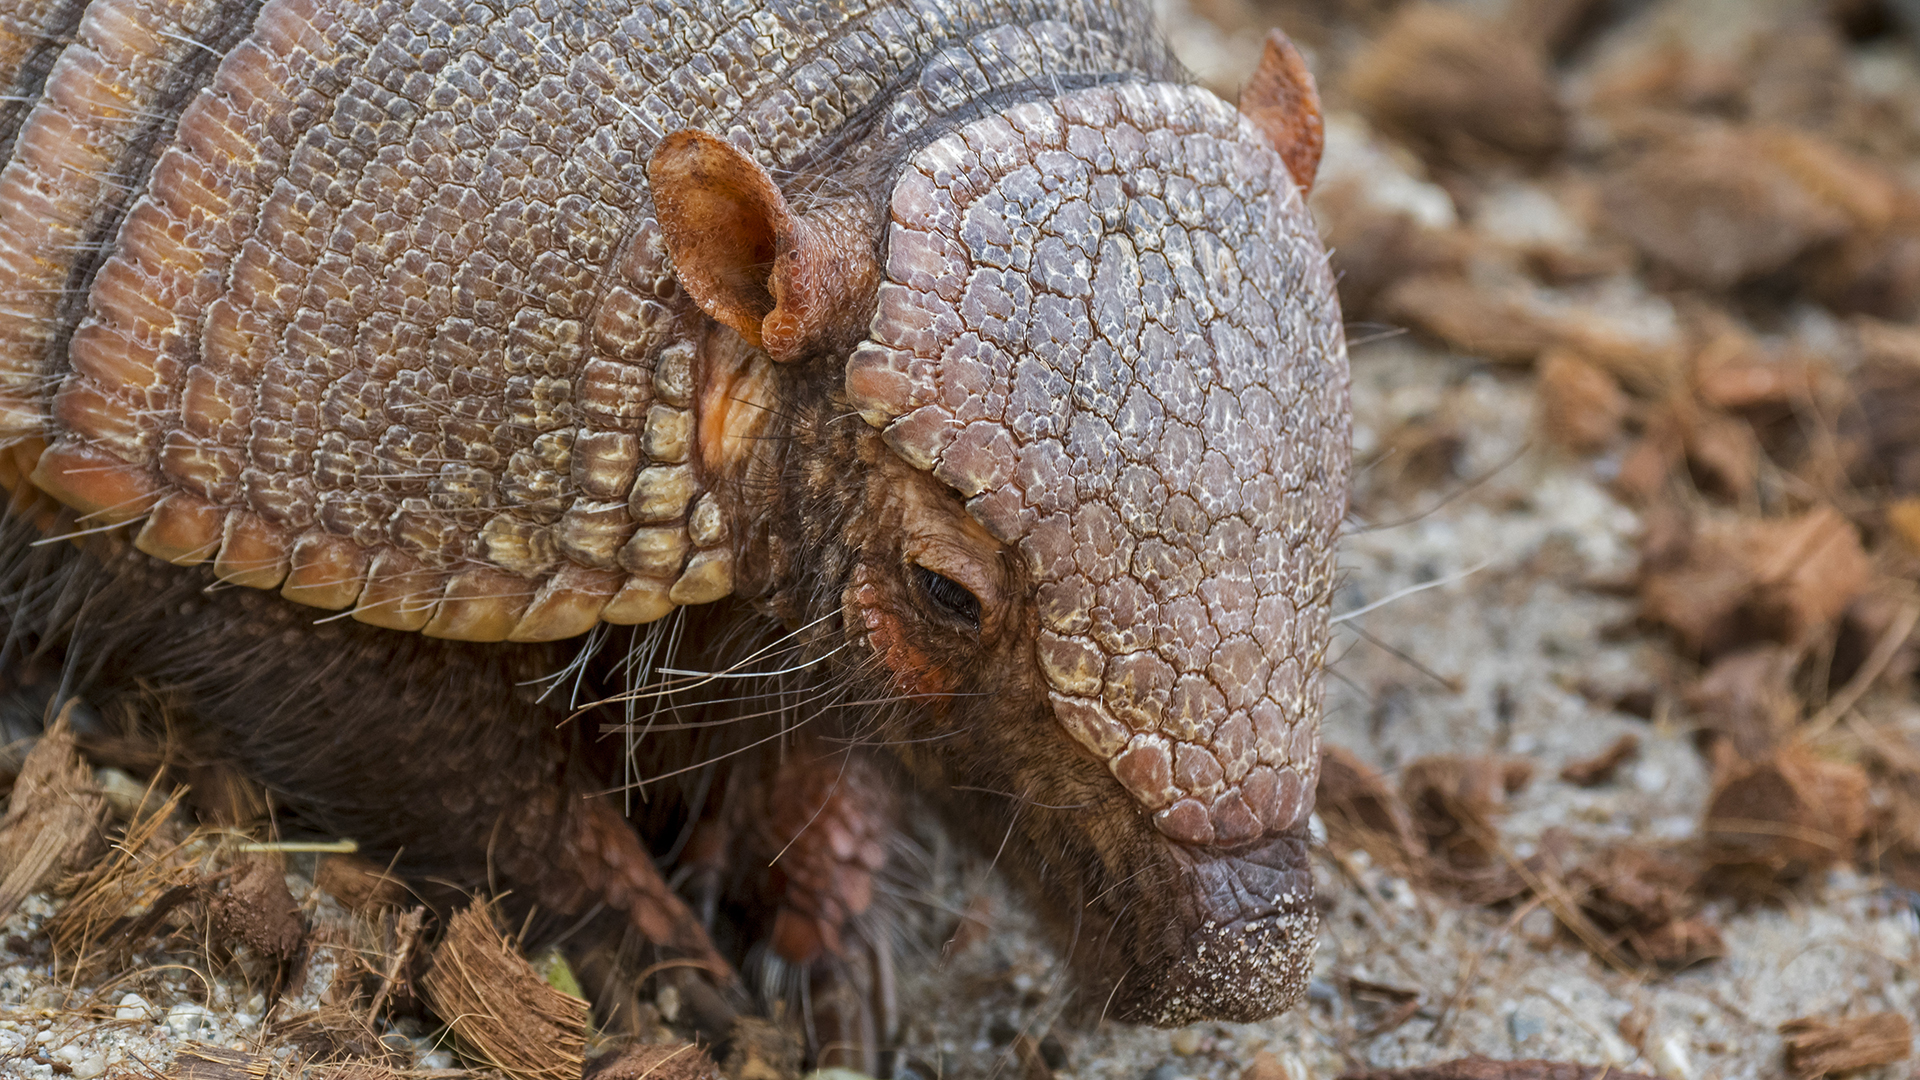 A screaming hairy armadillo having a quiet moment.